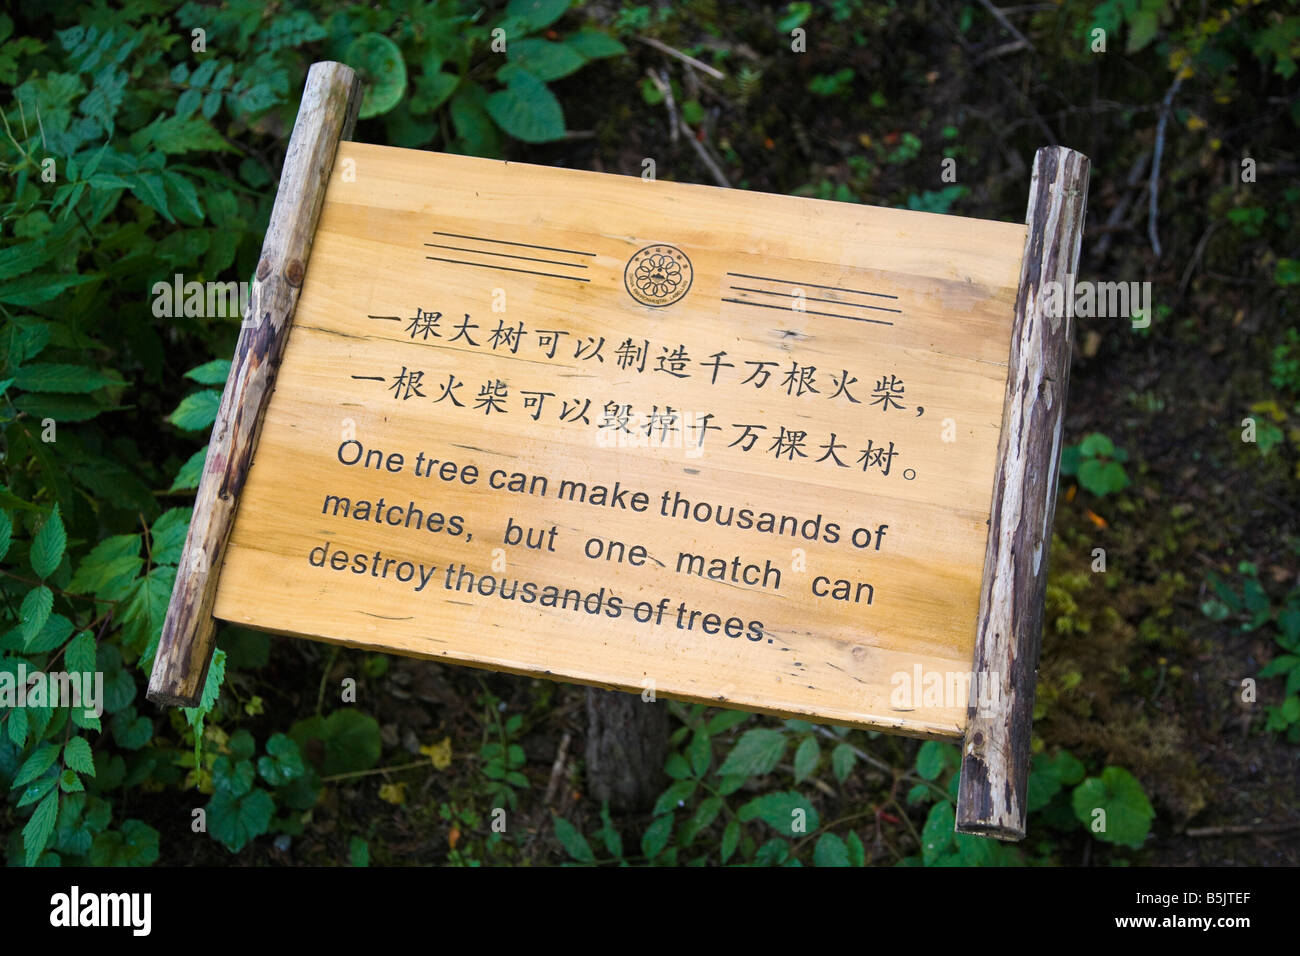 Warning sign in Huanglong 'One tree can make thousands of matches but one match can destroy thousands of trees' JMH3497 Stock Photo